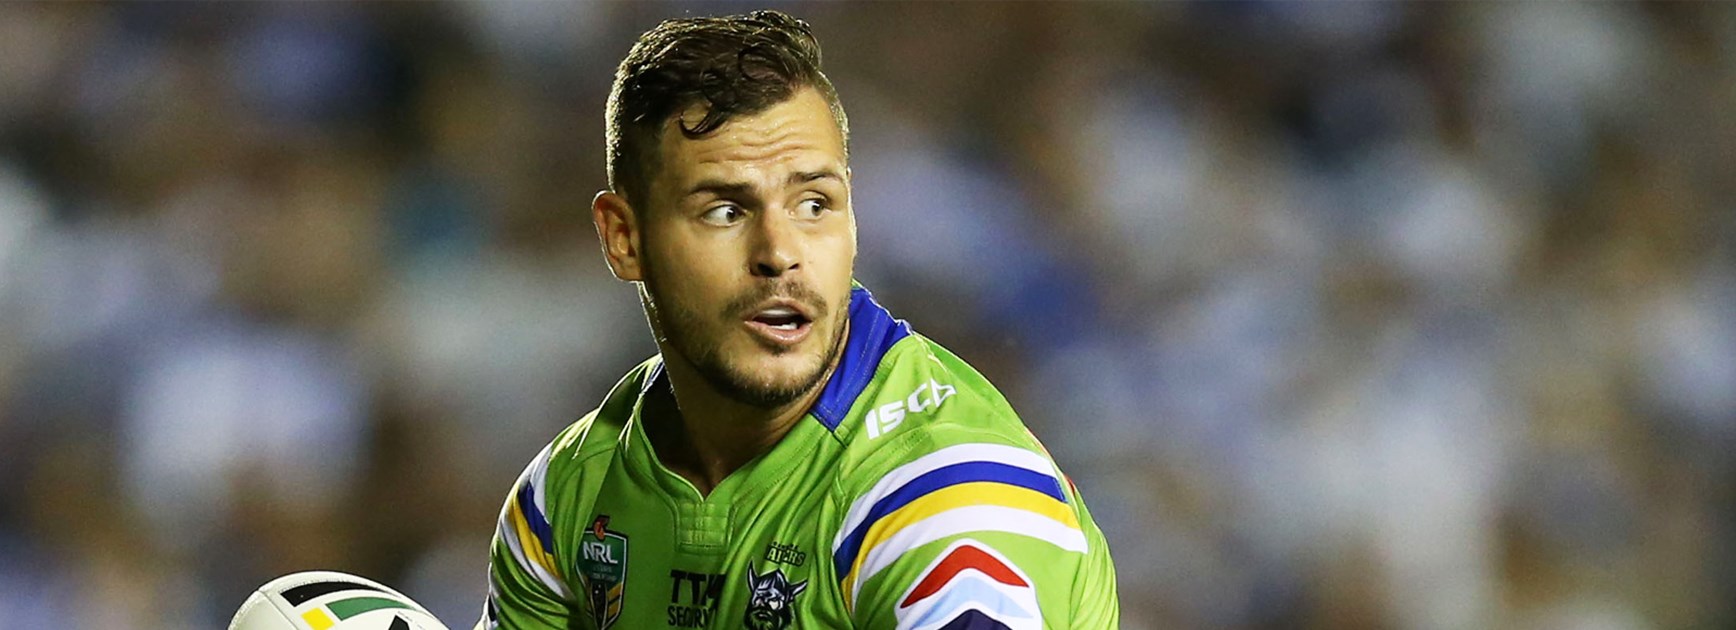 The return of Blake Austin and Aidan Sezer made an instant impact for Canberra in Round 5.